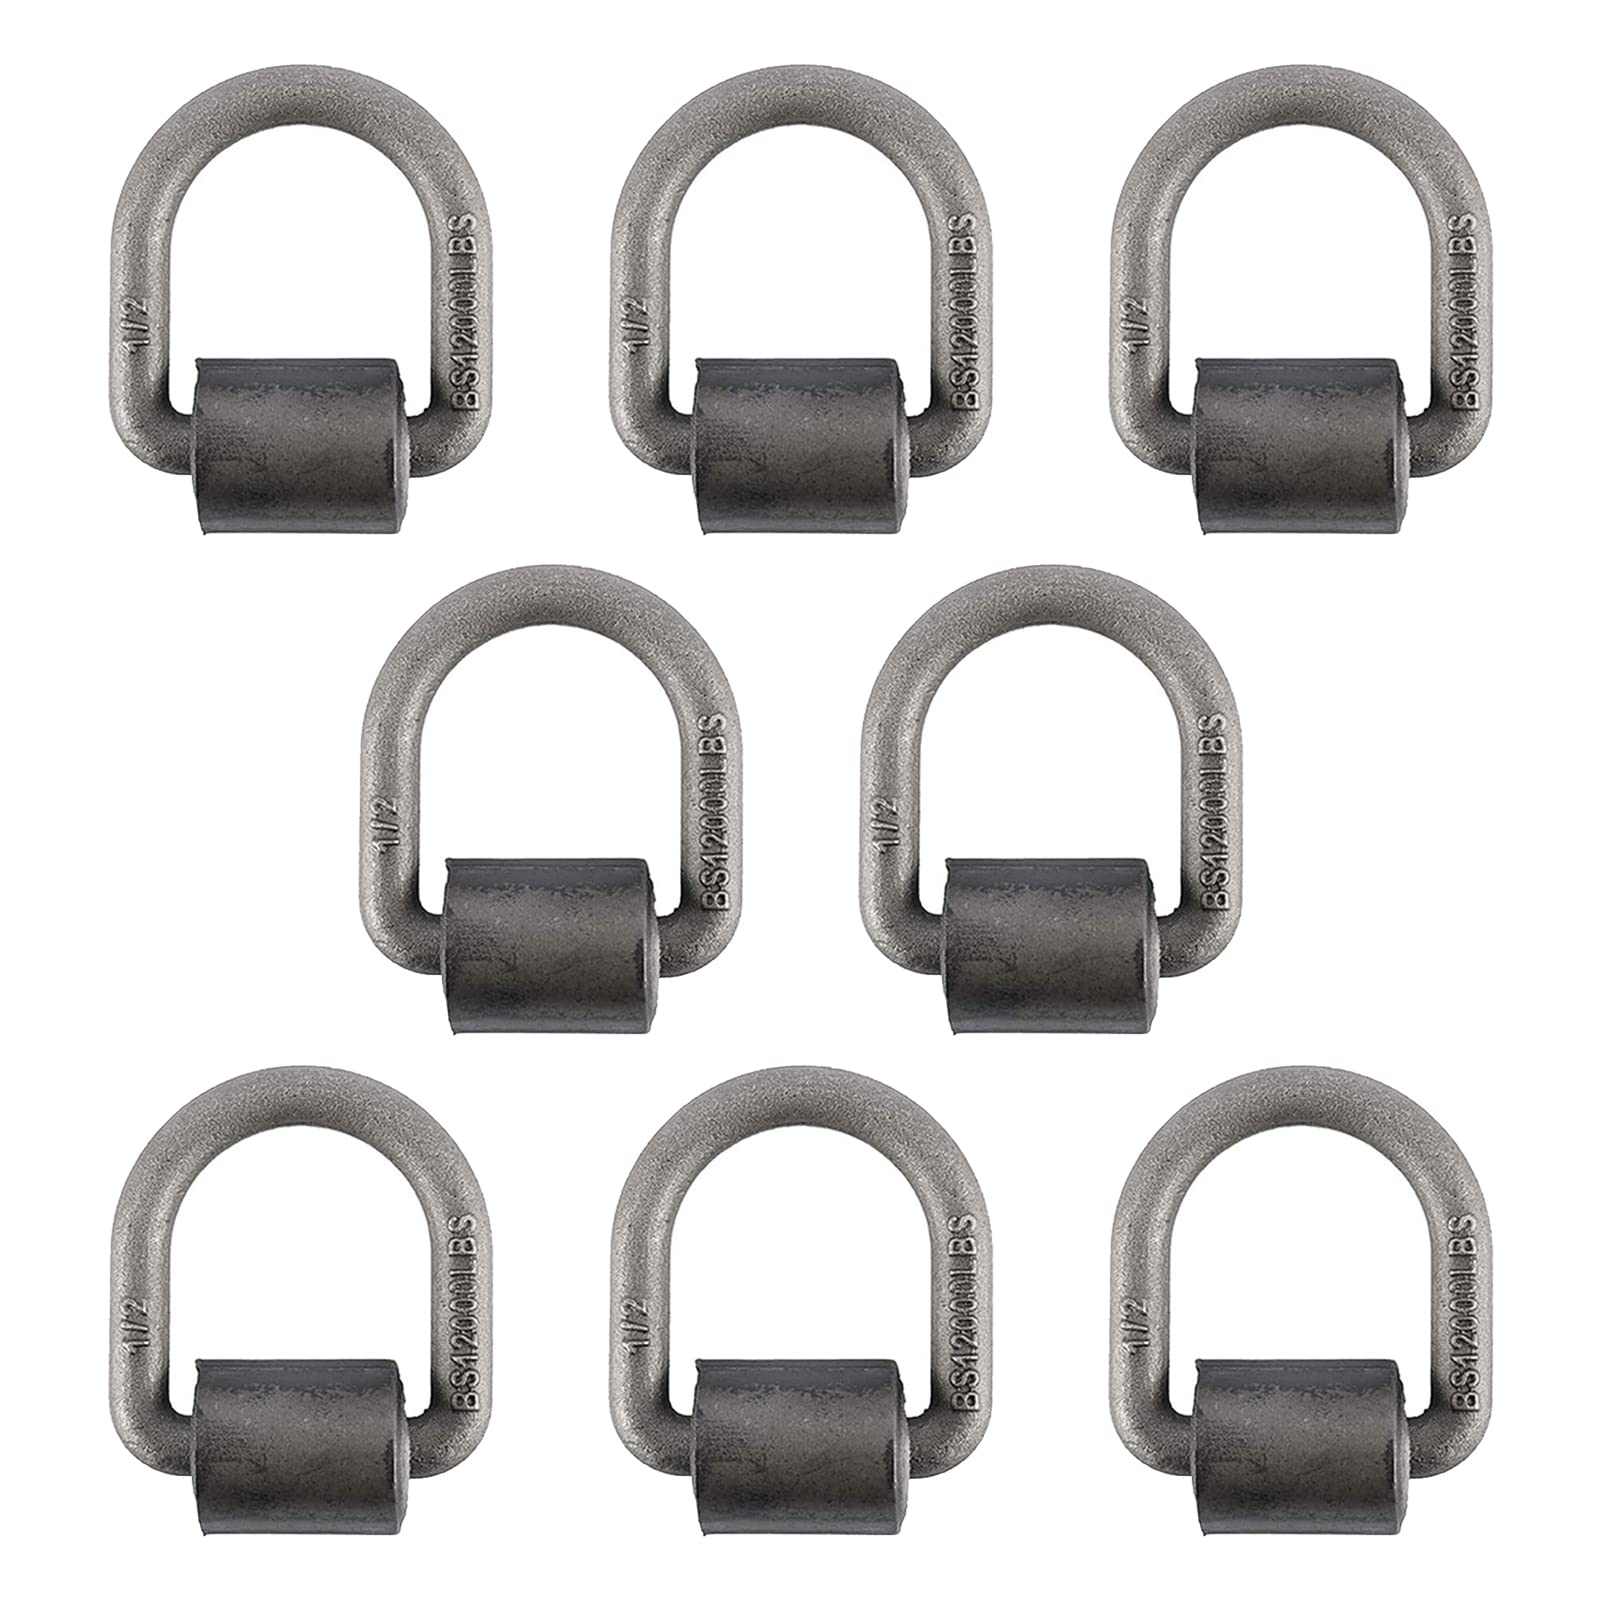 Yaegoo 8 Pack 1/2 inch Heavy Duty Weld-On Forged D Ring, Steel D-Ring Tie-Down Anchors for Trucks Trailers, 4,000 lbs Working Load Limit, Size: 1/2